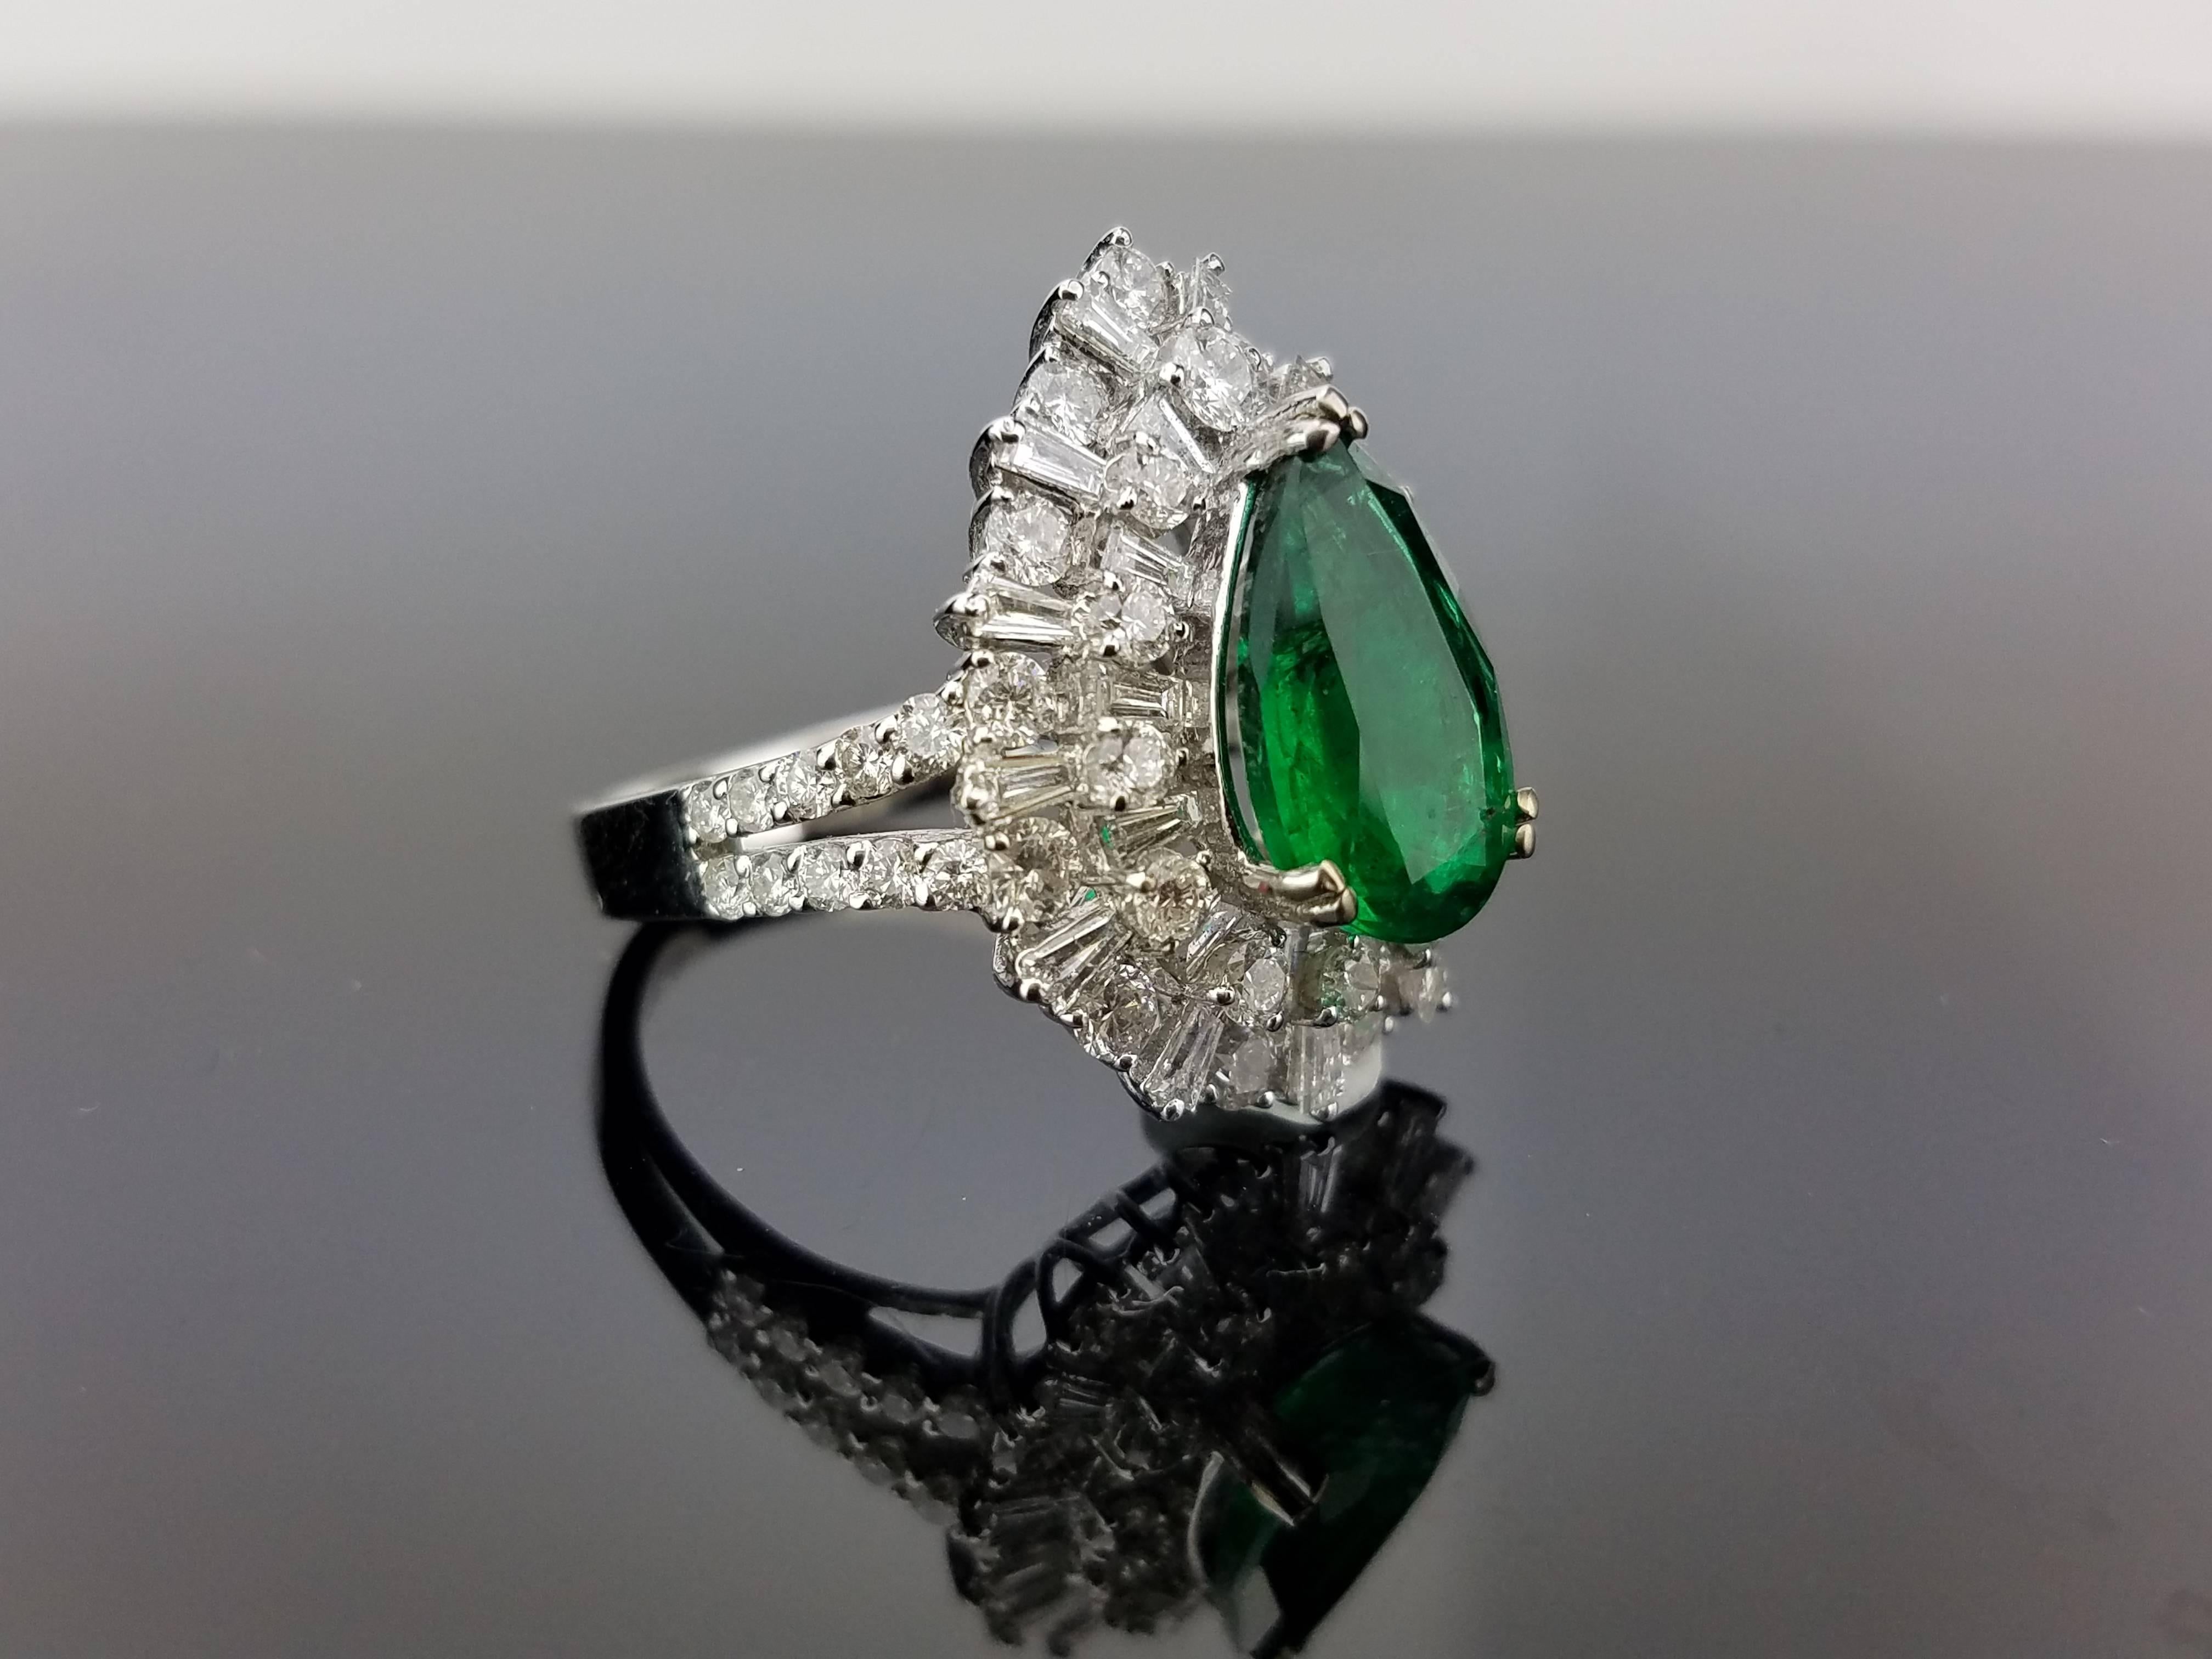 A statement 2.55 carat pear shape Zambian Emerald and White Diamond cocktail ring, set in 18K white gold. 

Stone Details: 
Stone: Emerald
Carat Weight: 2.55 Carats

Diamond Details: 
Total Carat Weight: 2.08 carat
Quality: VS/SI , H/I

18K Gold: